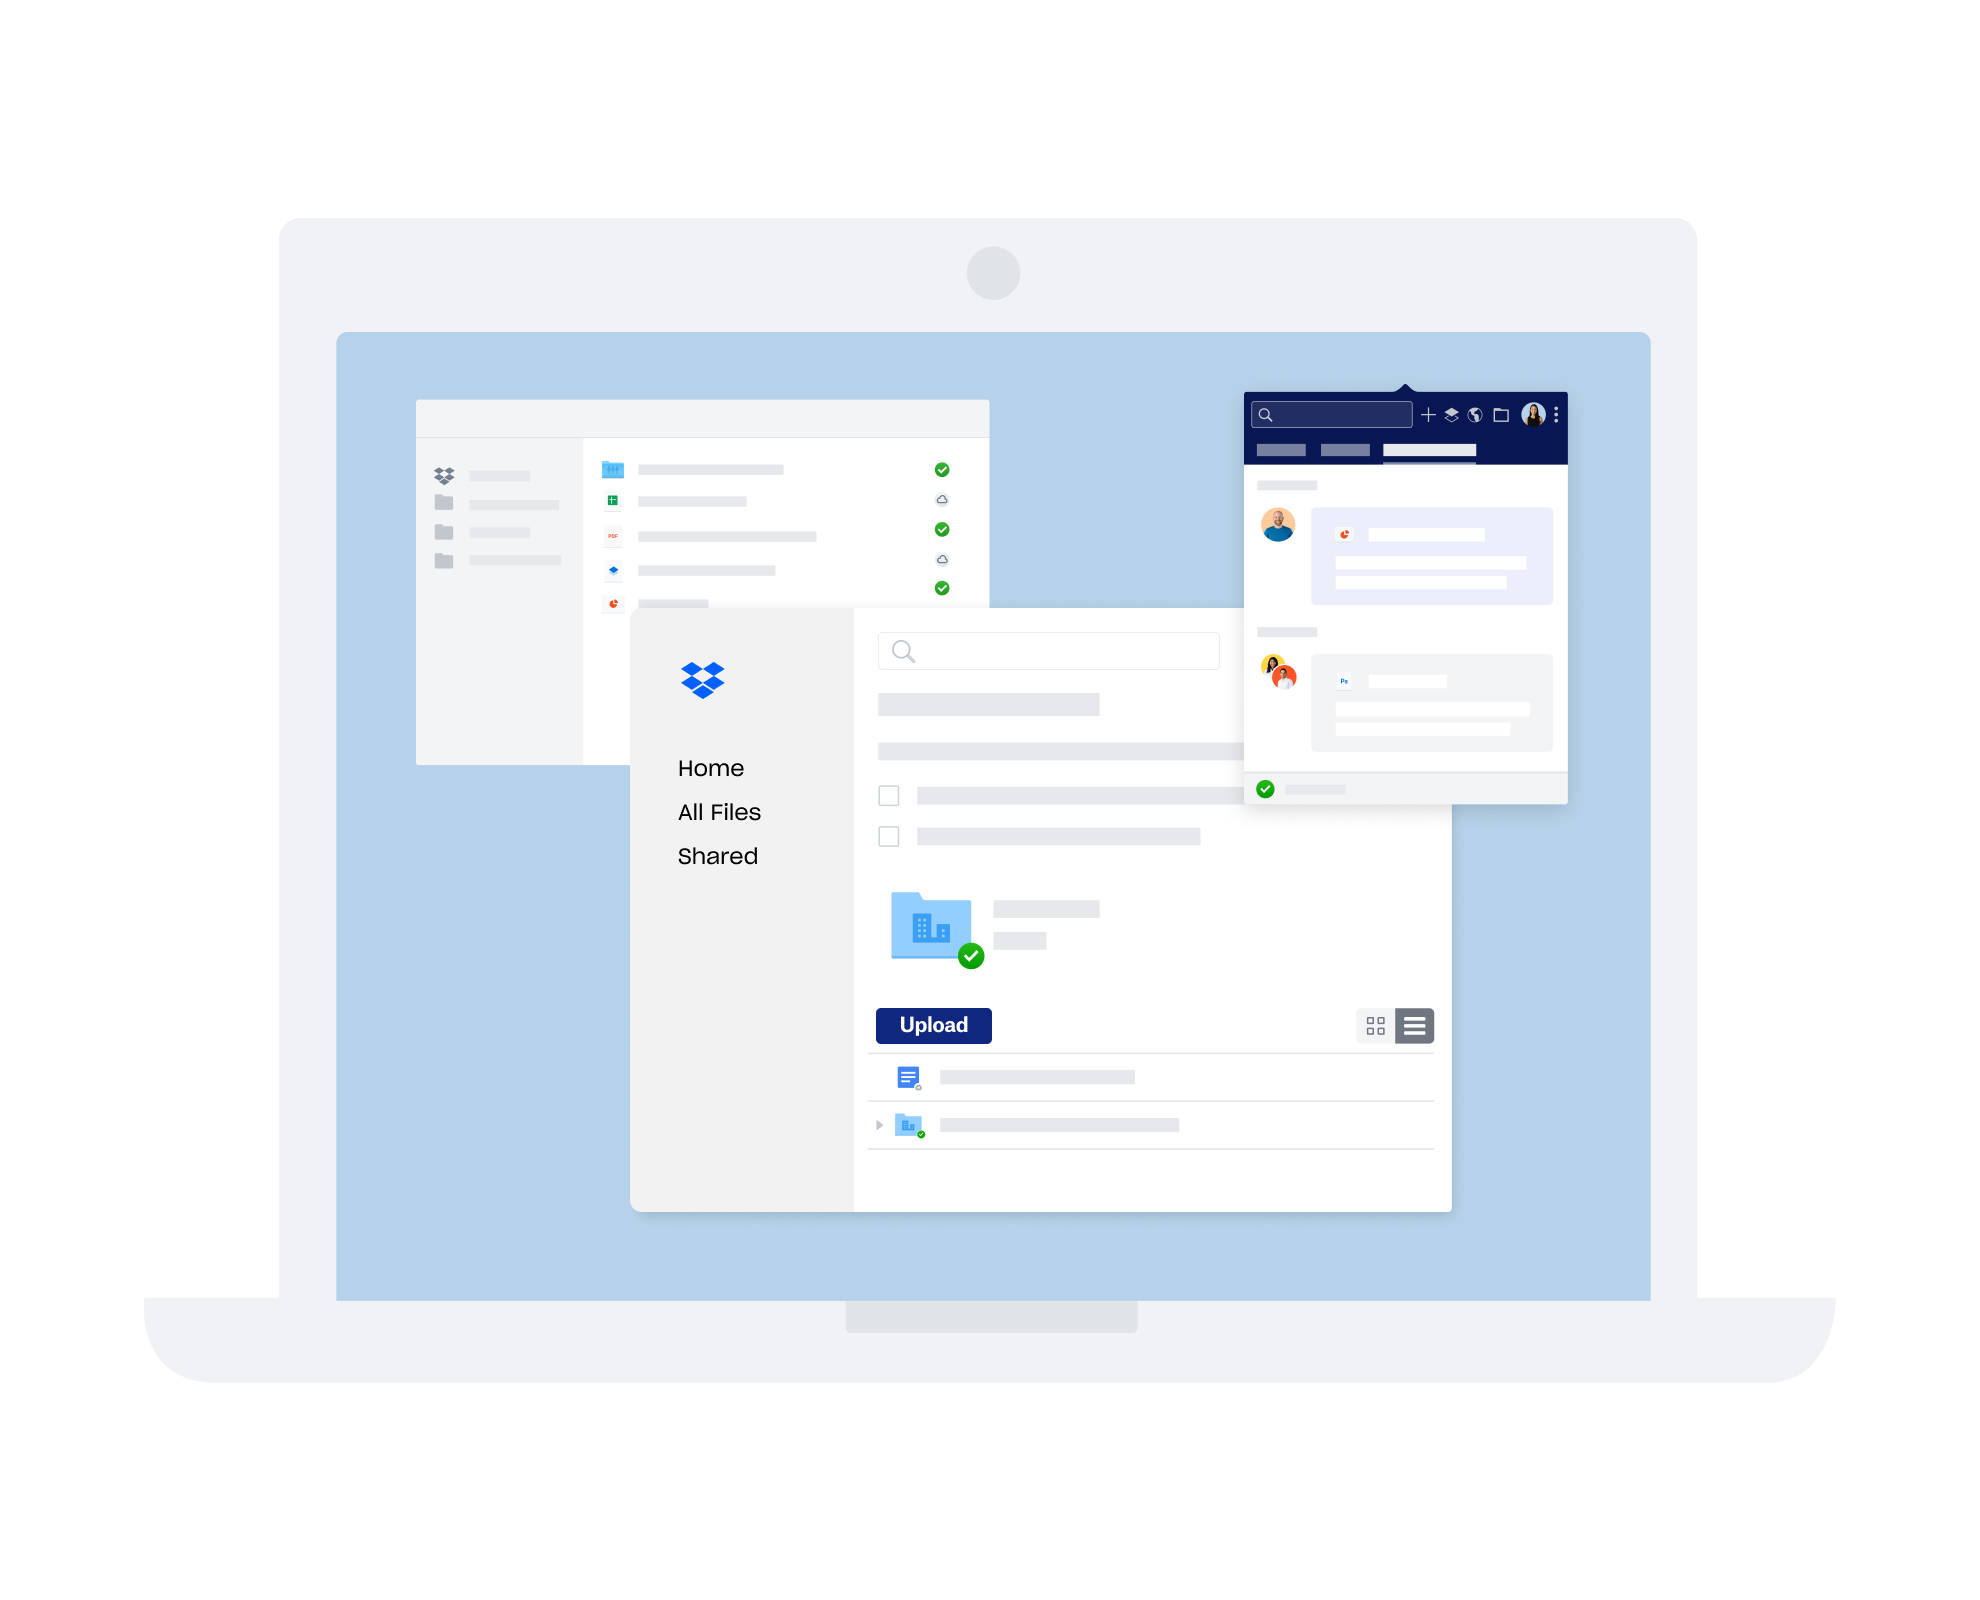 Various Dropbox interfaces for communication and collaboration